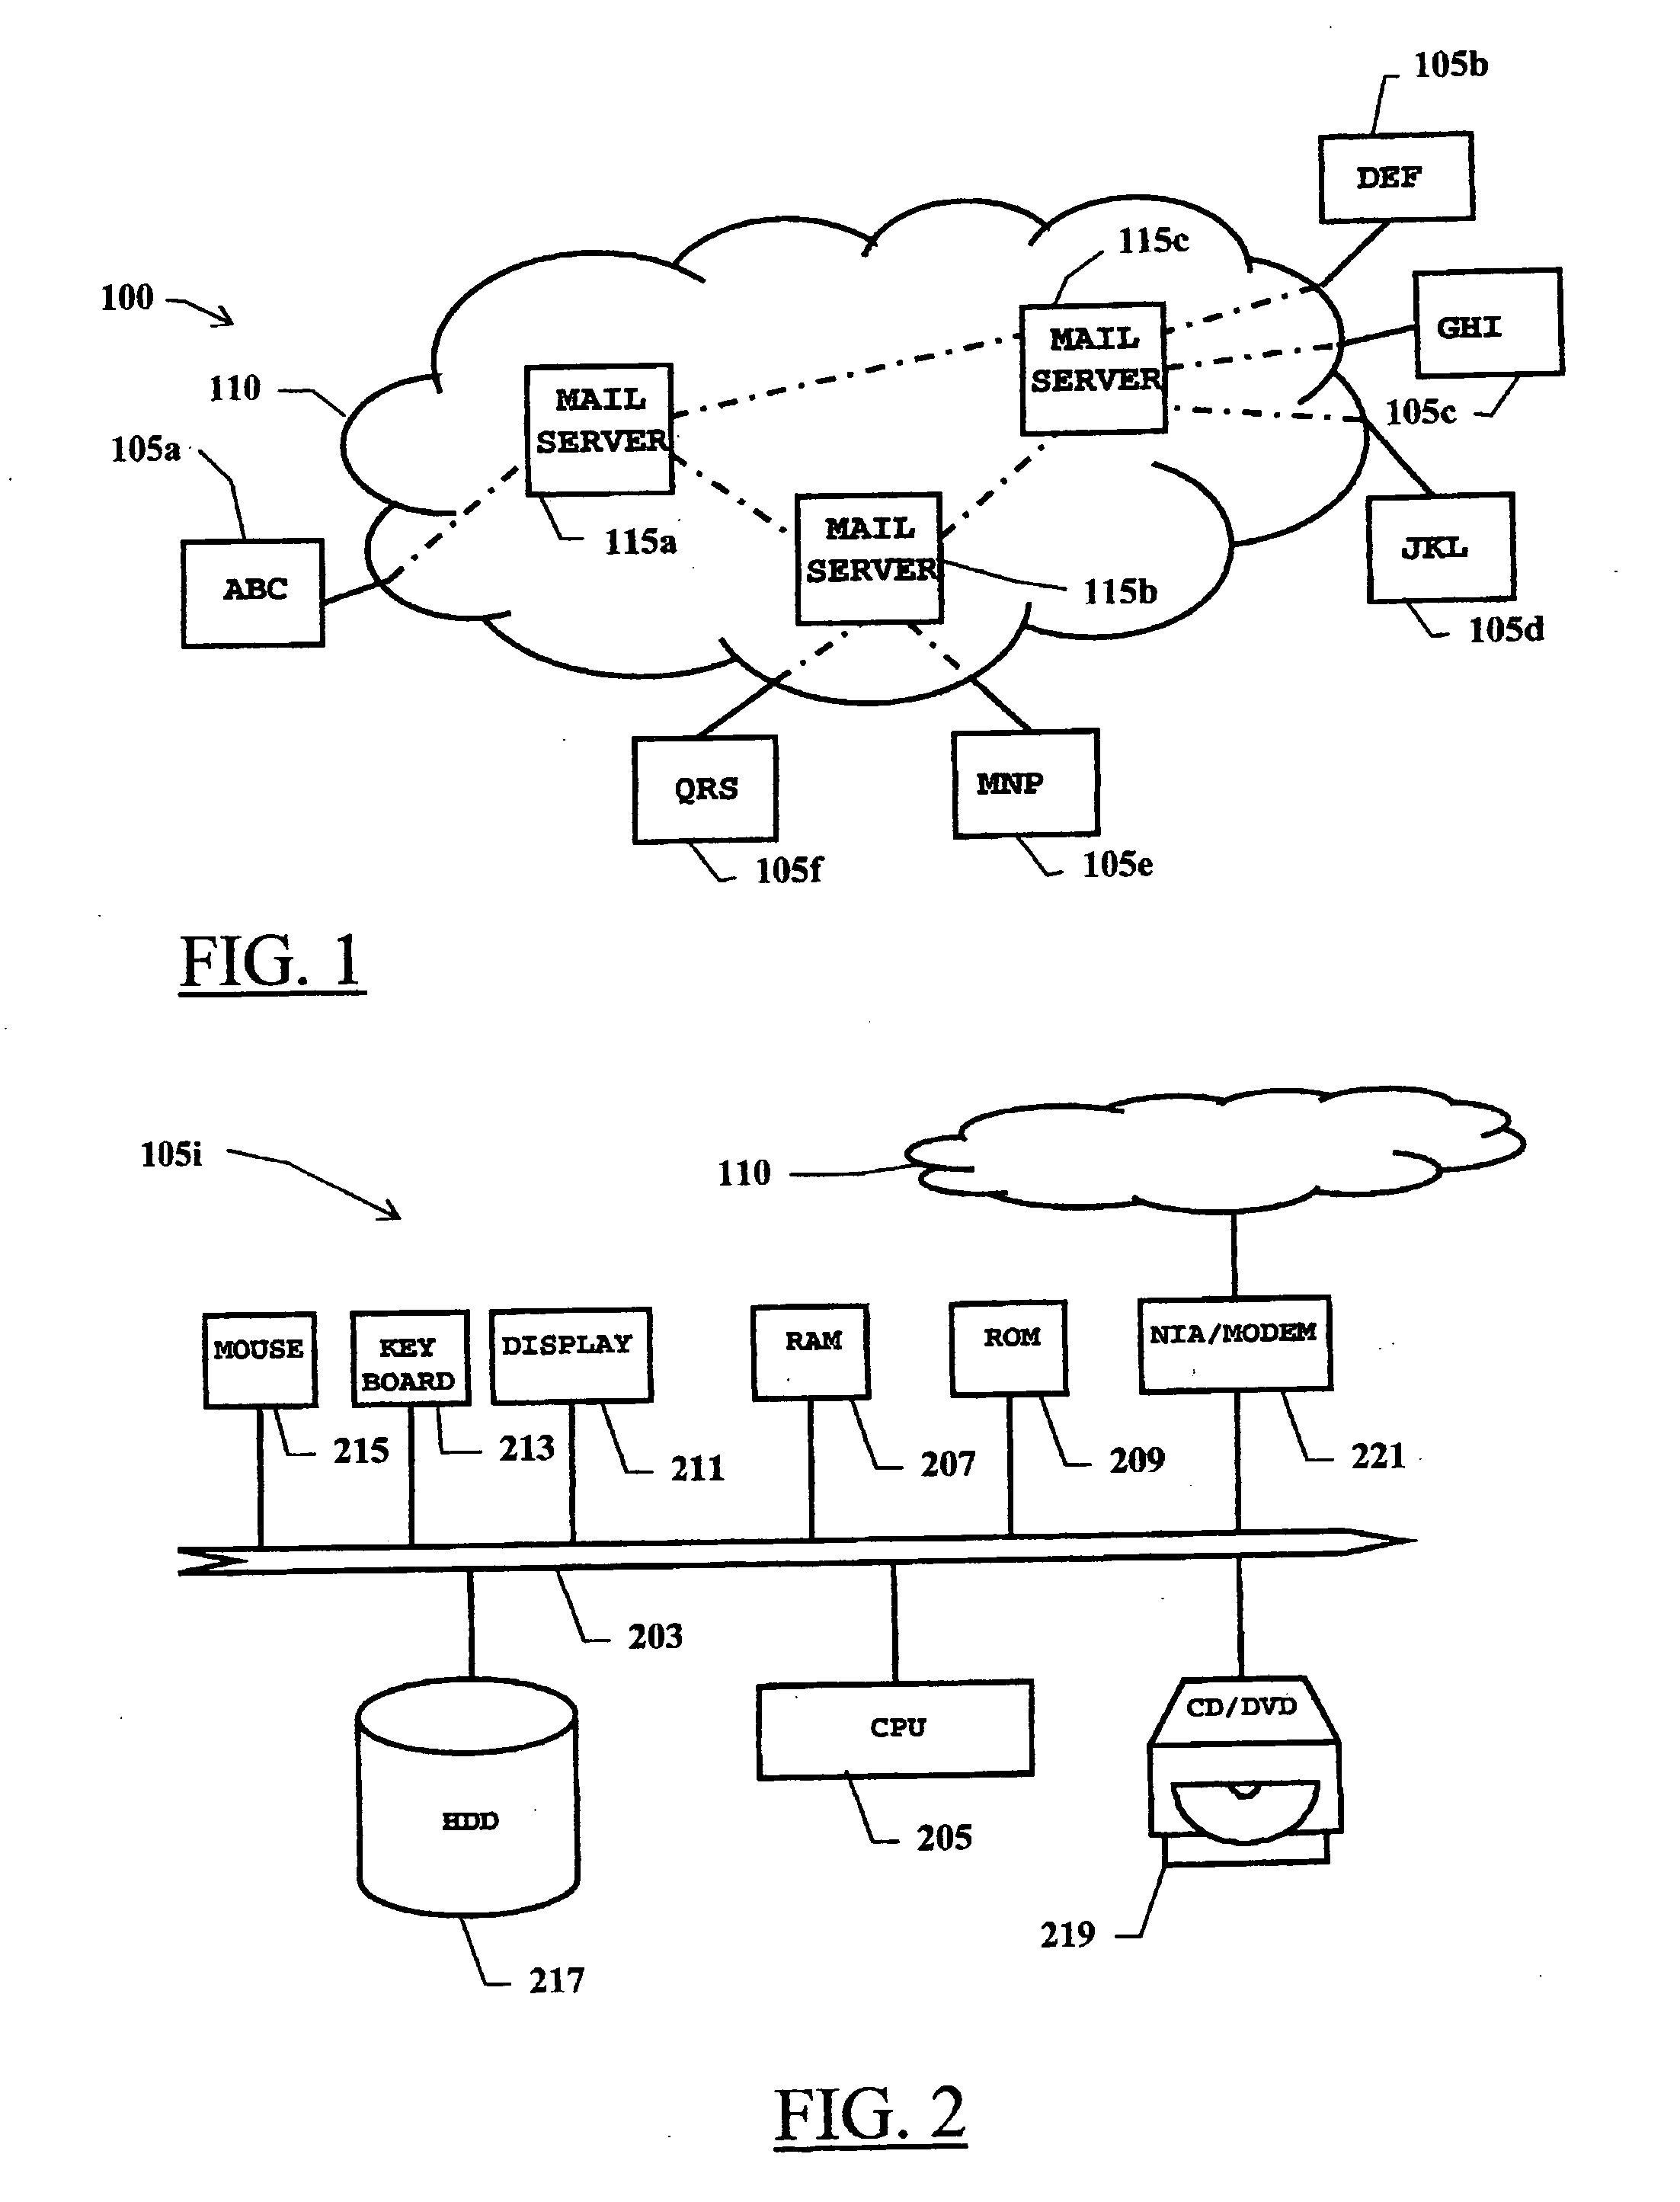 Method and system for distributing e-mail messages to recipients